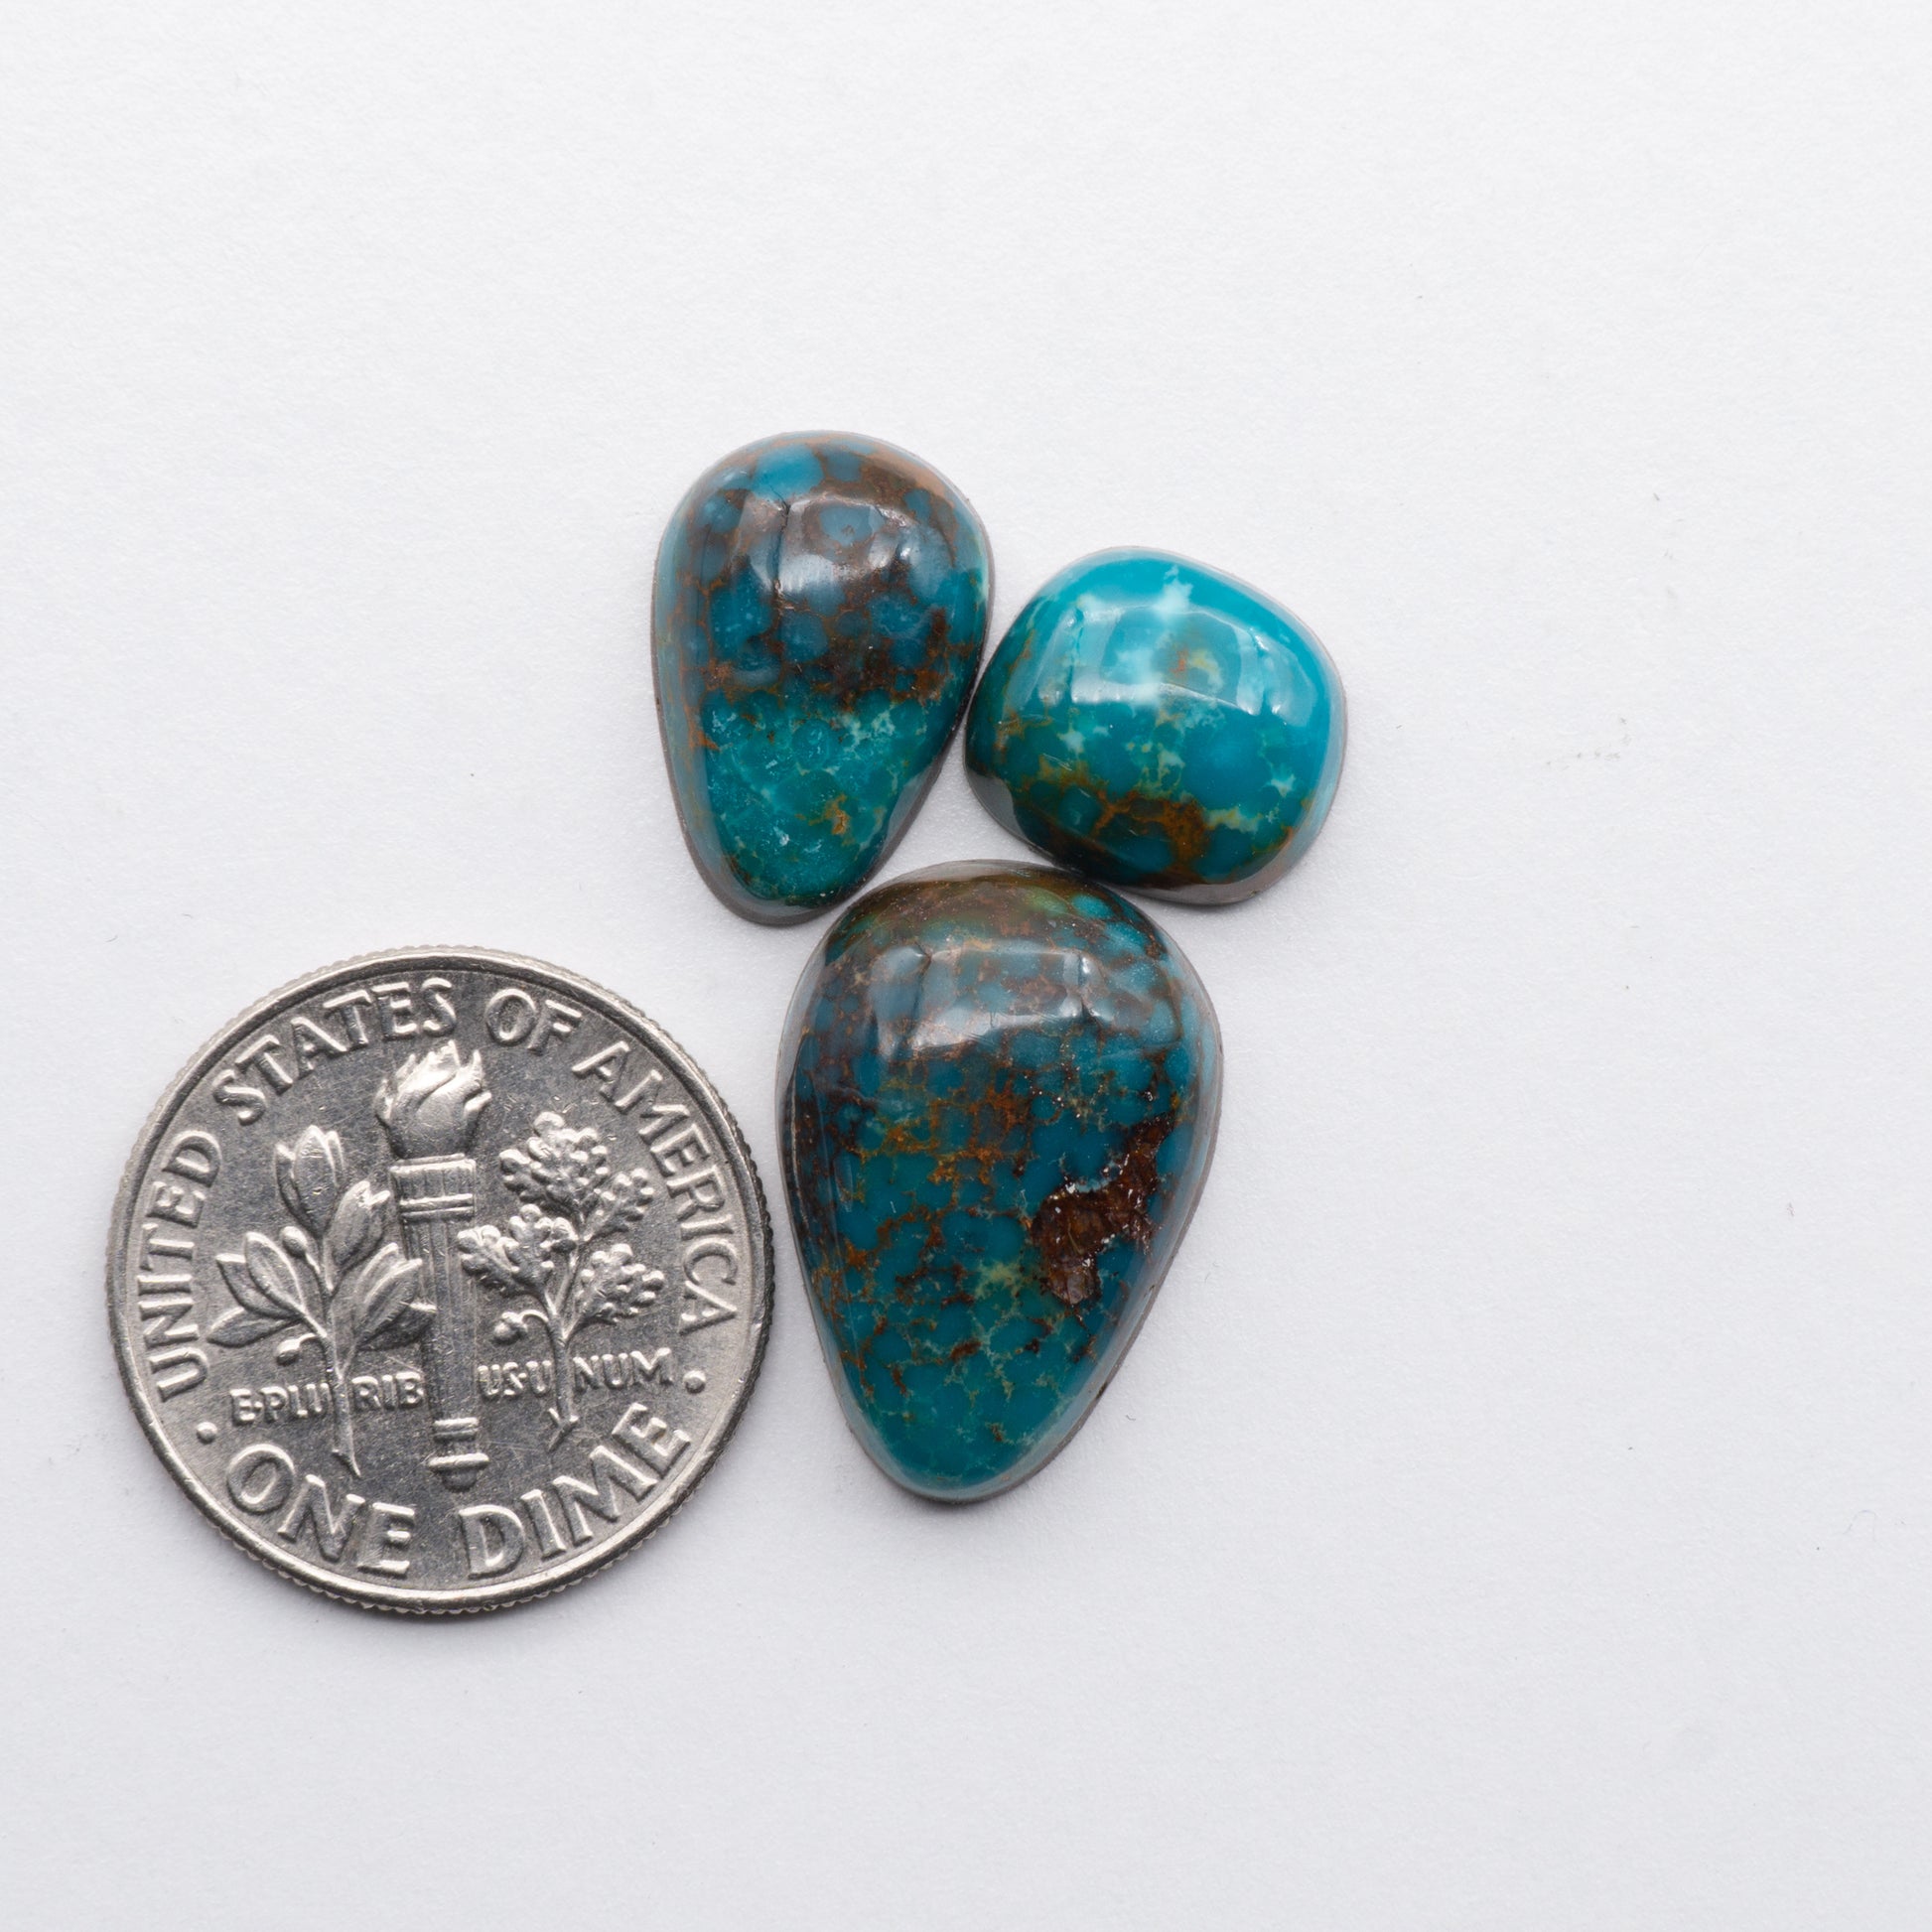 Cumpas Turquoise cabochons have a glossy finish and are backed for added strength. Cumpas Turquoise is mined in Sonora, Mexico.